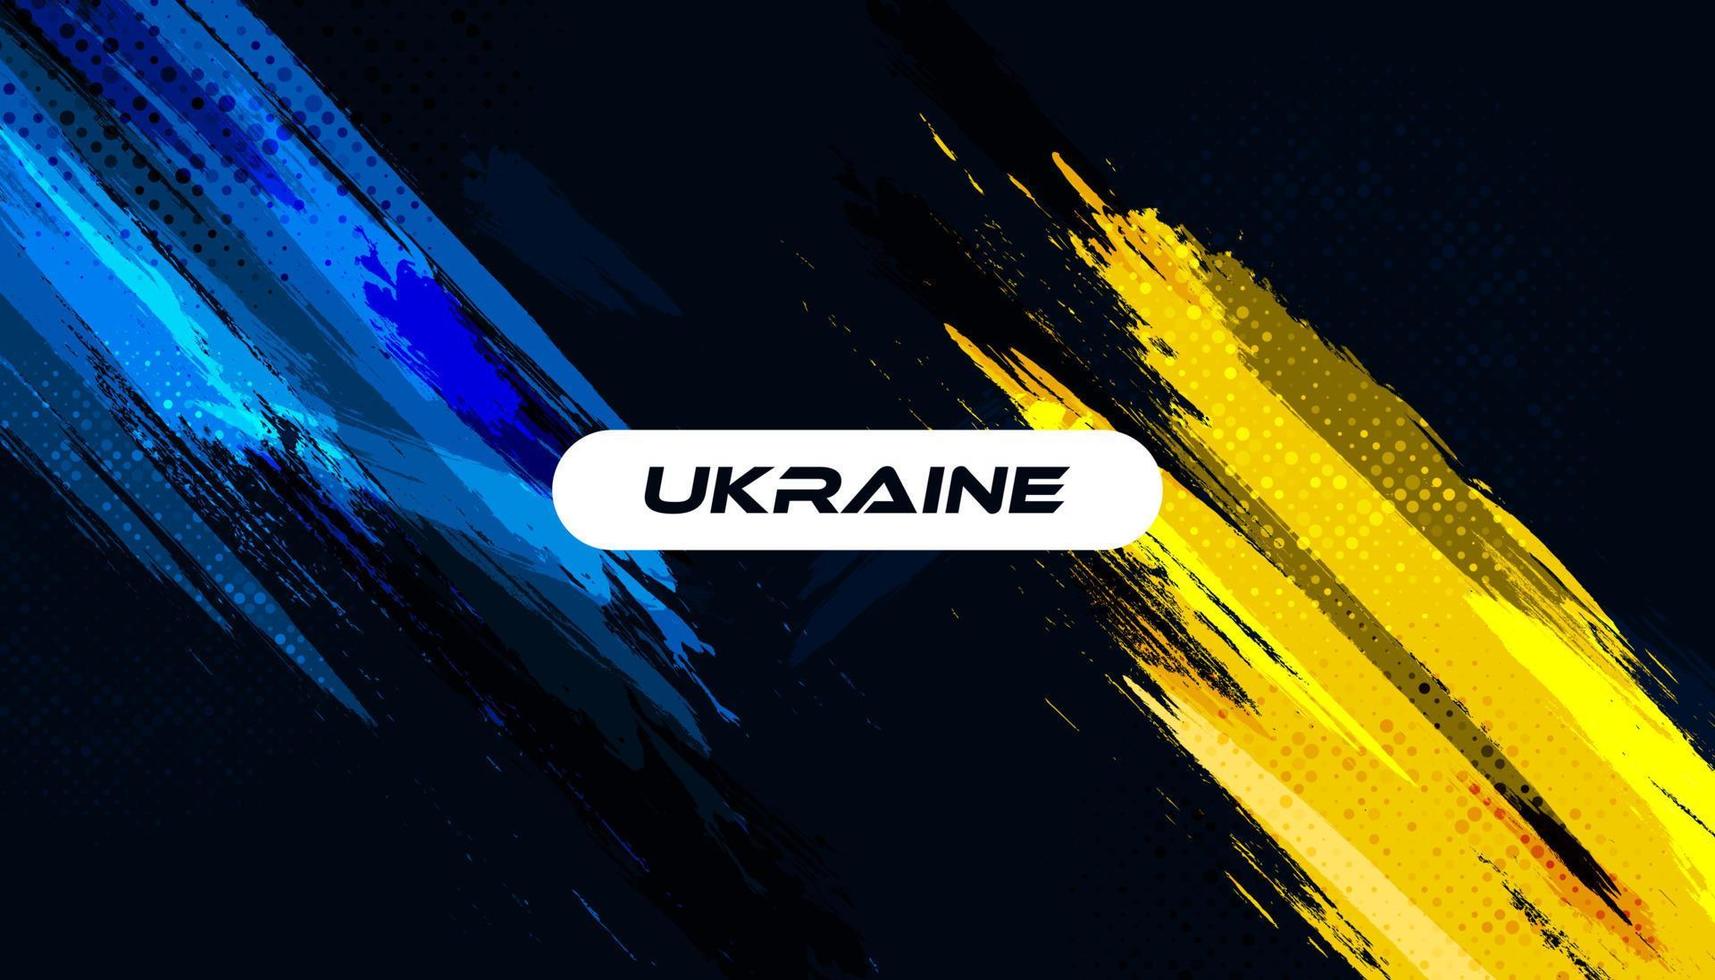 Ukraine Flag with Brush Concept and Halftone Effect. Flag of Ukraine in Grunge Style. Ukrainian Background with Hand Painted Concept vector